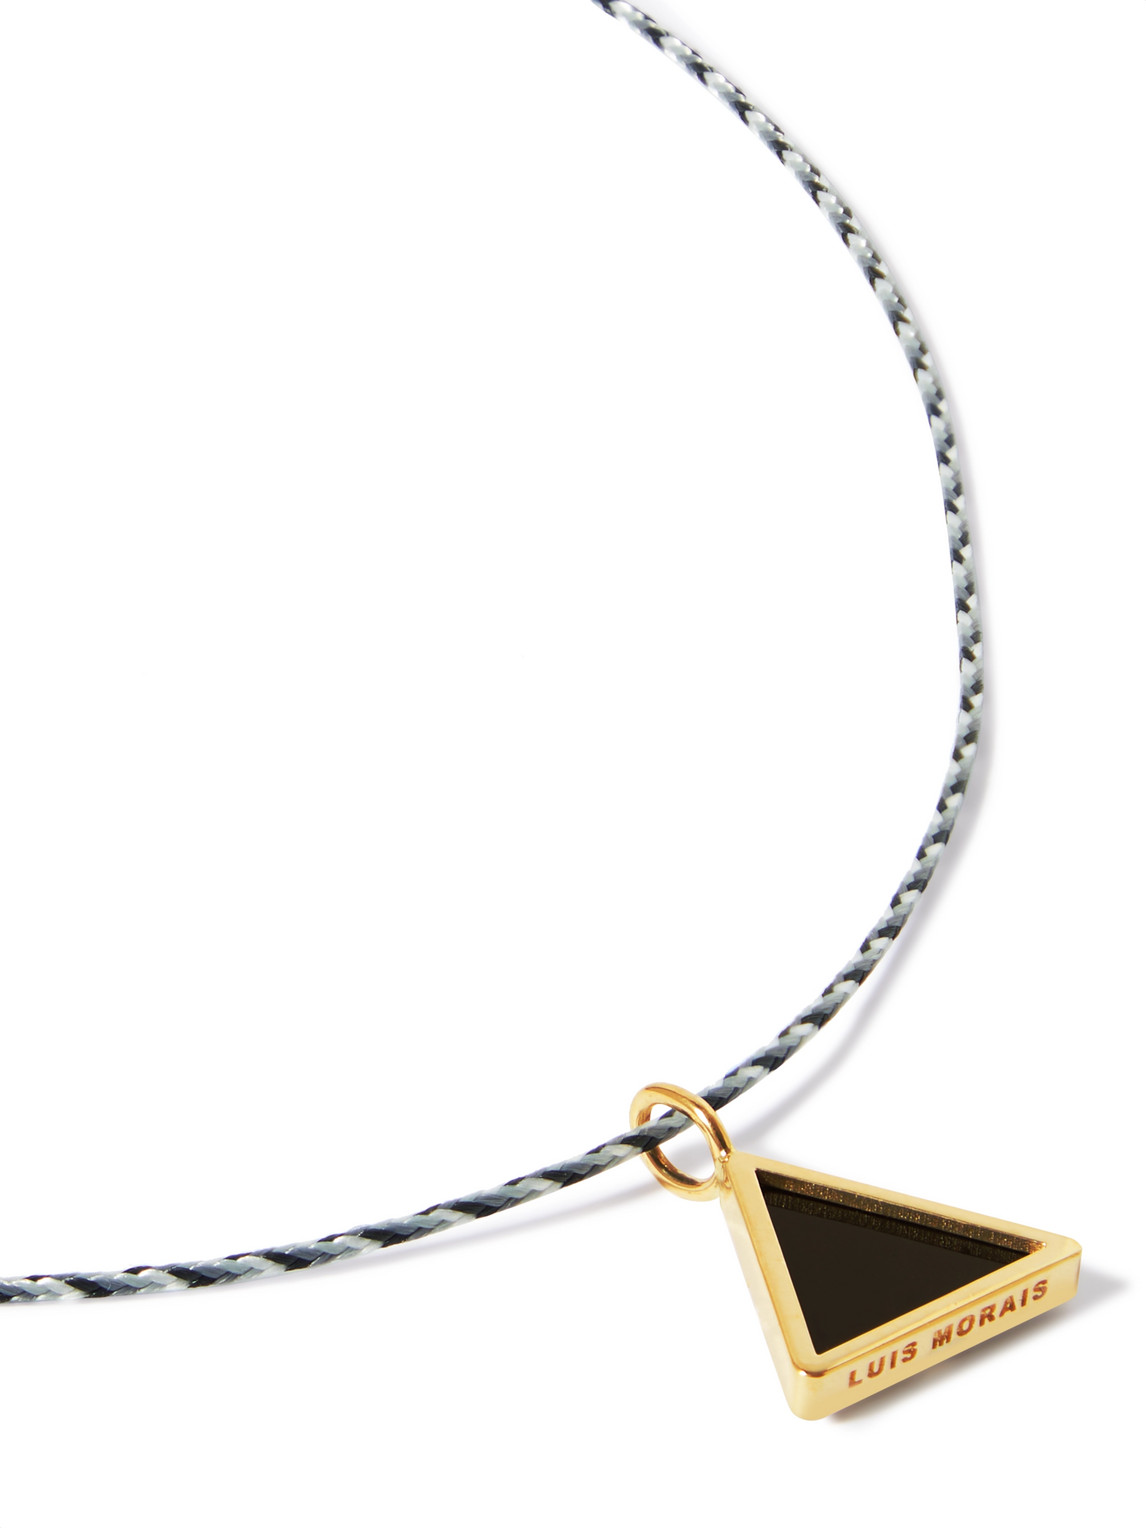 Luis Morais Gold, Onyx And Cord Necklace In Black